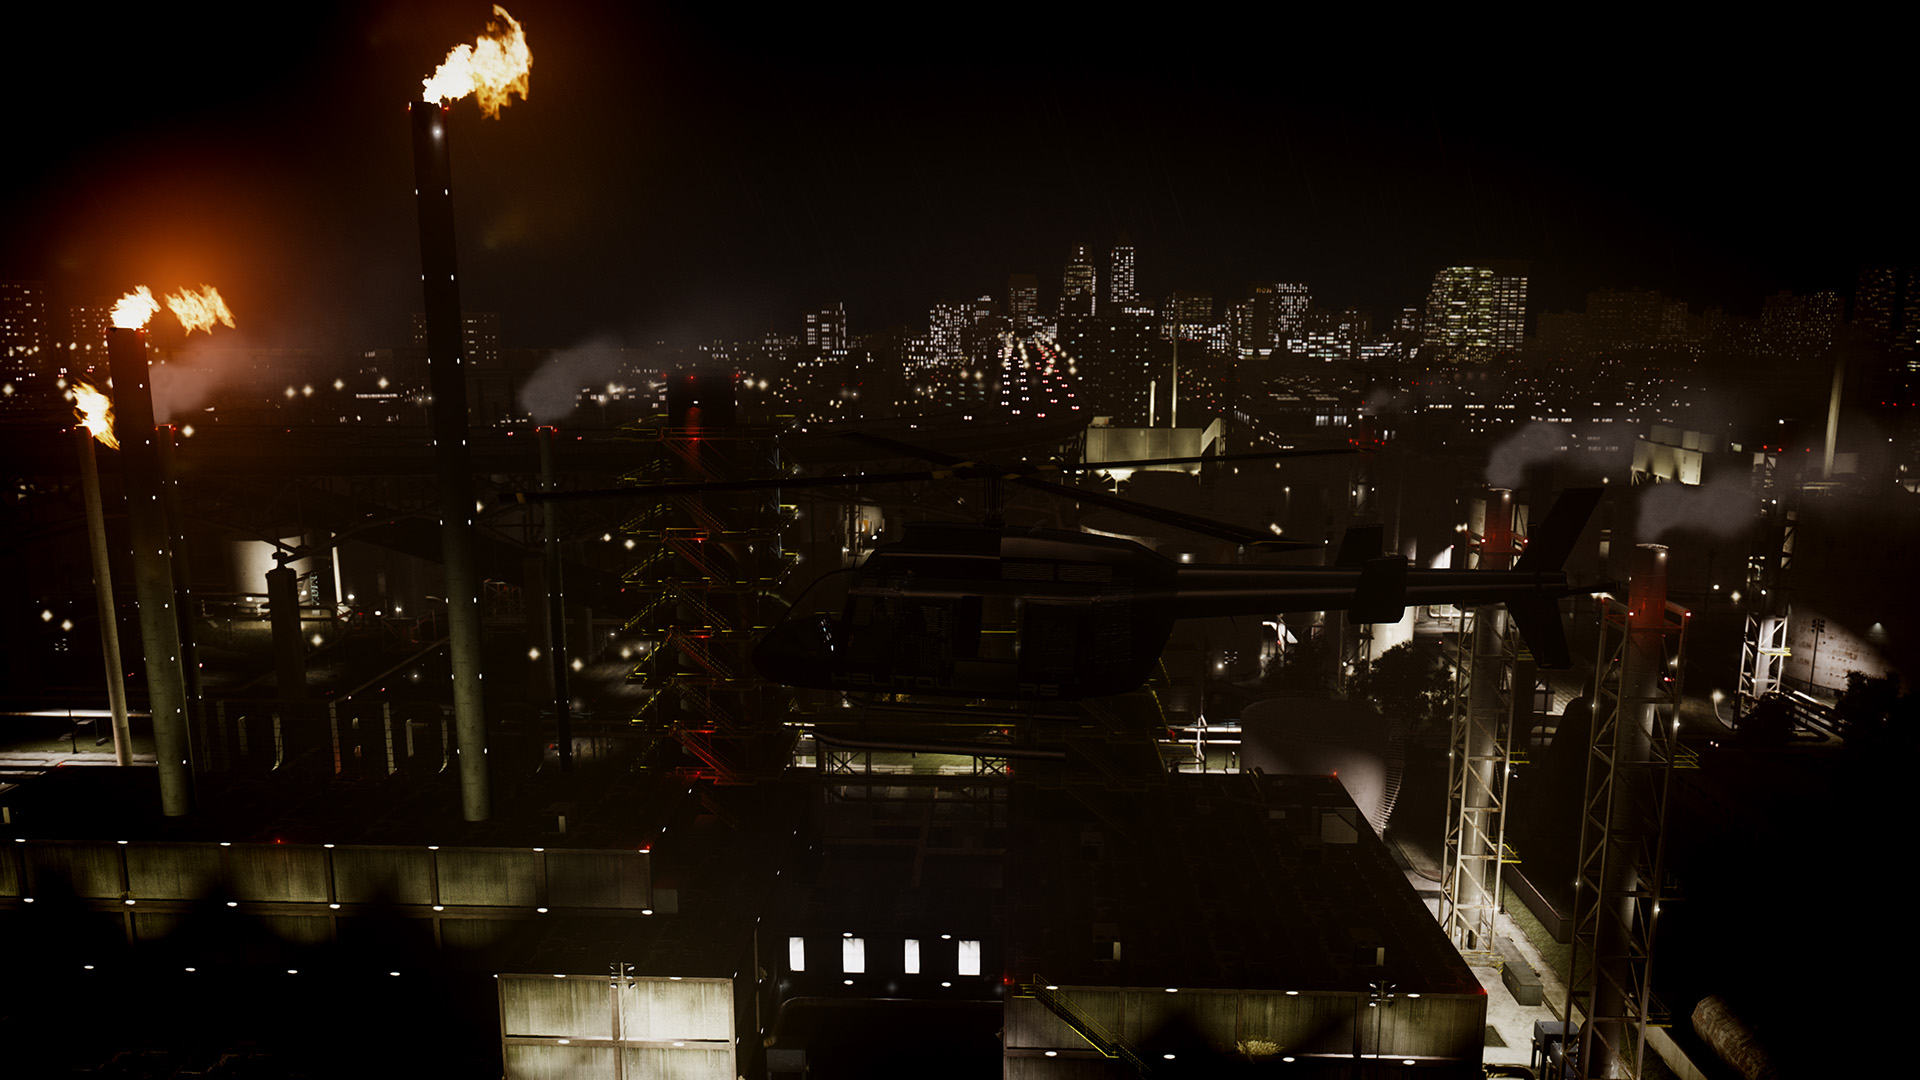 Video Game Grand Theft Auto IV 1920x1080